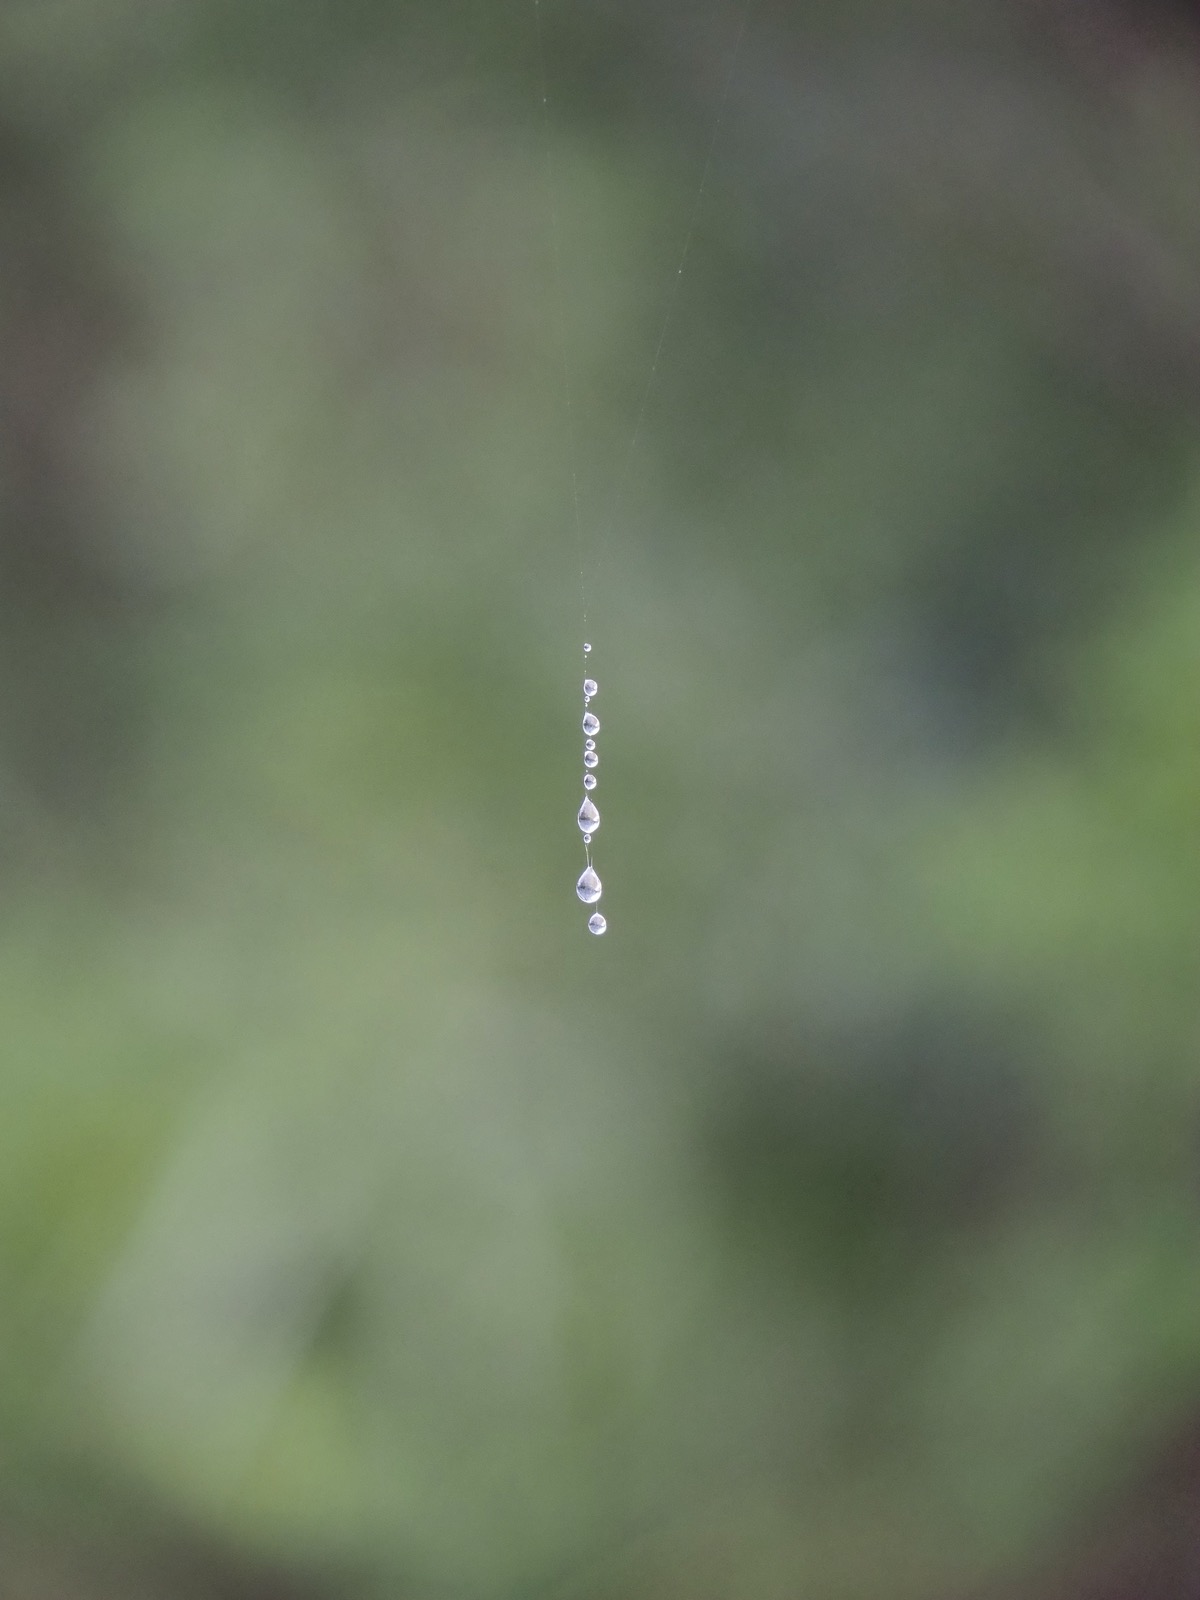 Water droplets clinging to a bit of vertical spider web